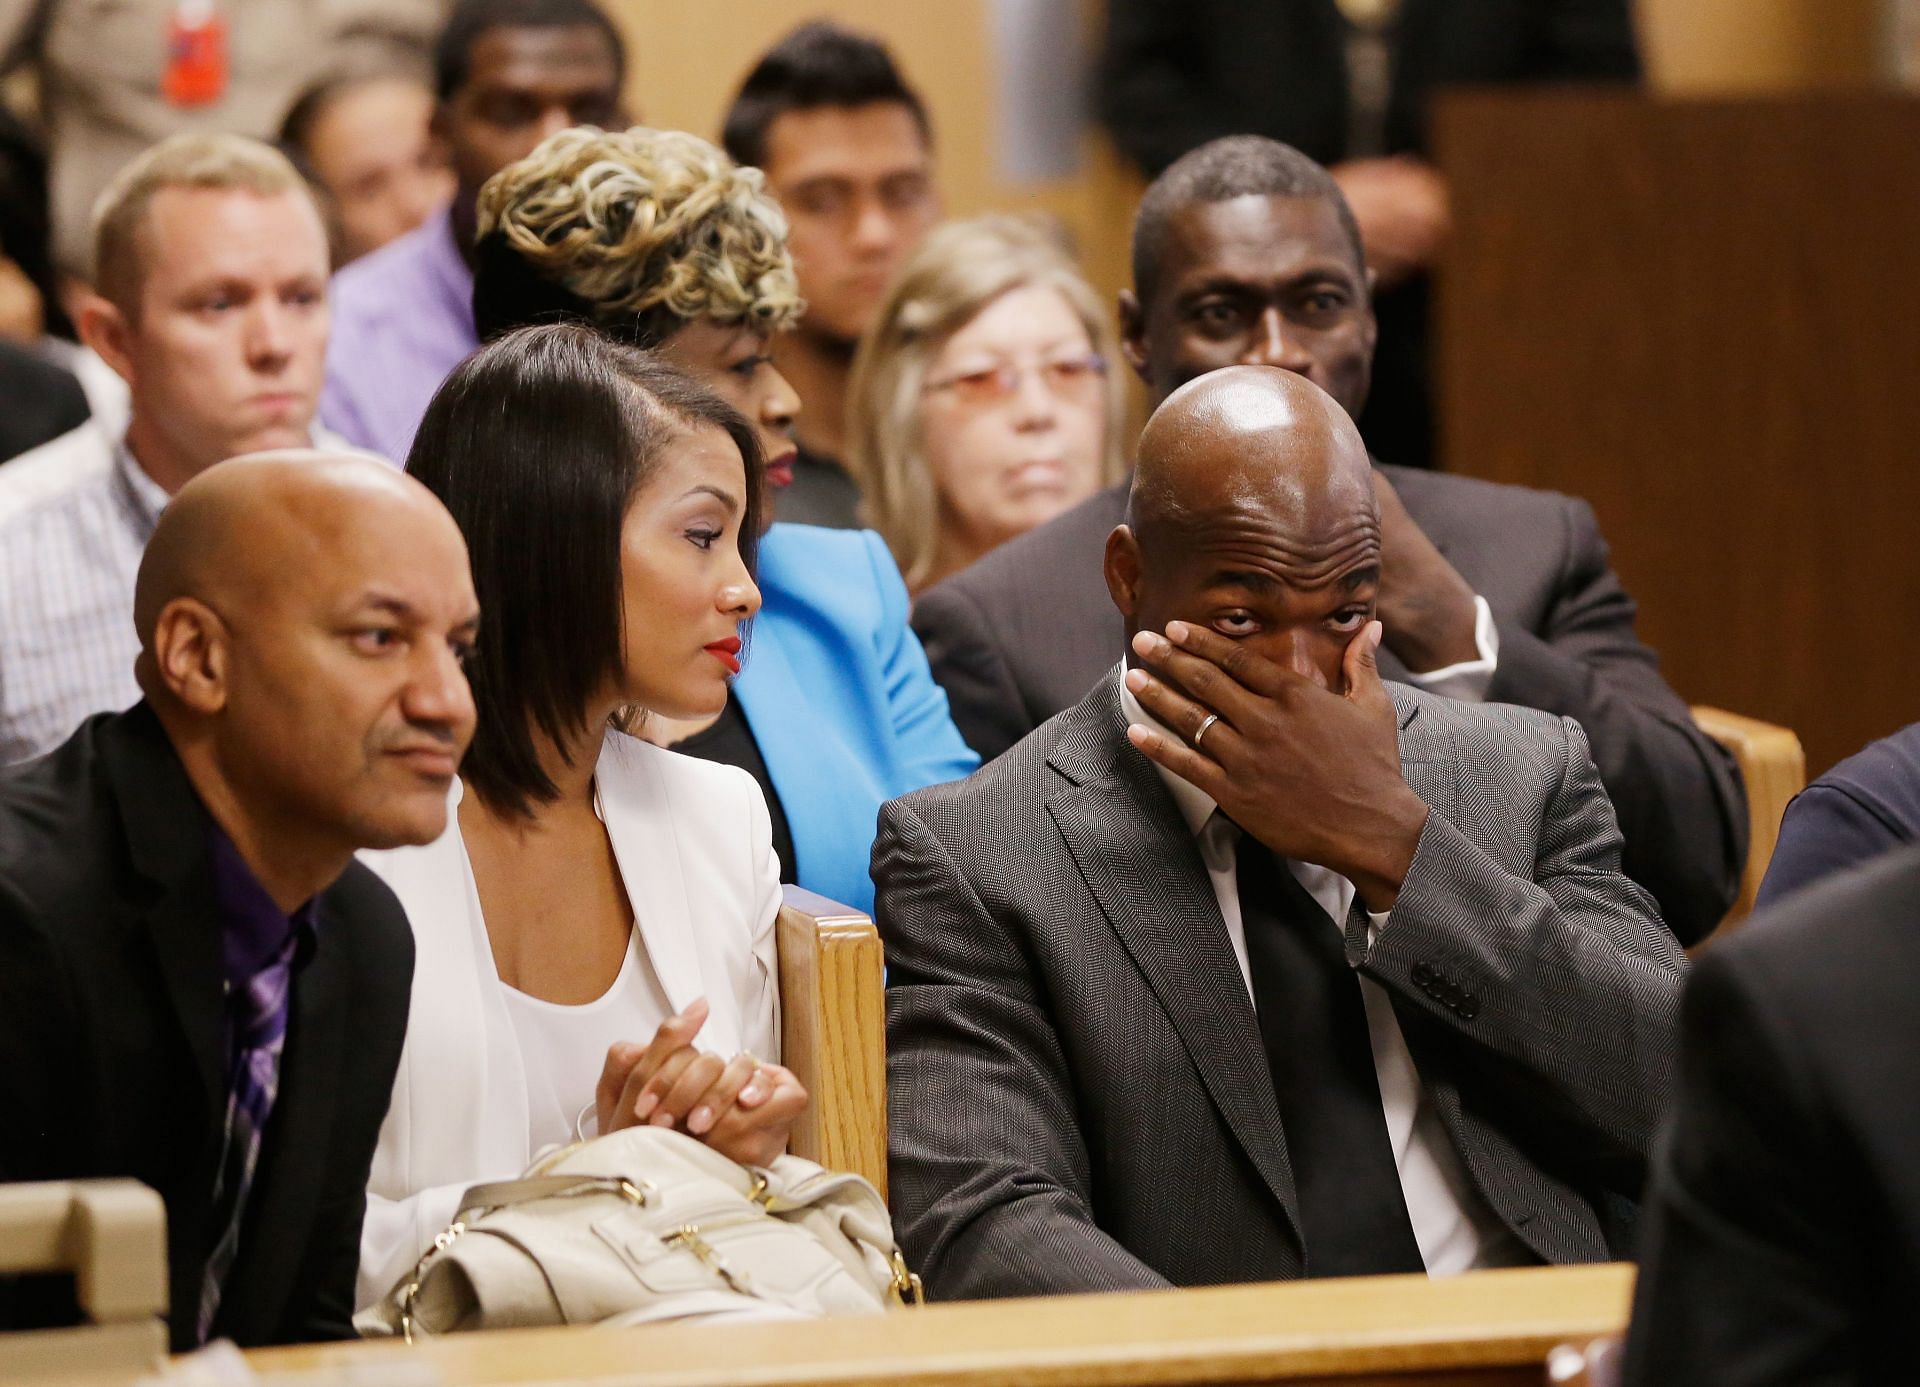 Adrian Peterson Makes First Court Appearance On Child Abuse Charges